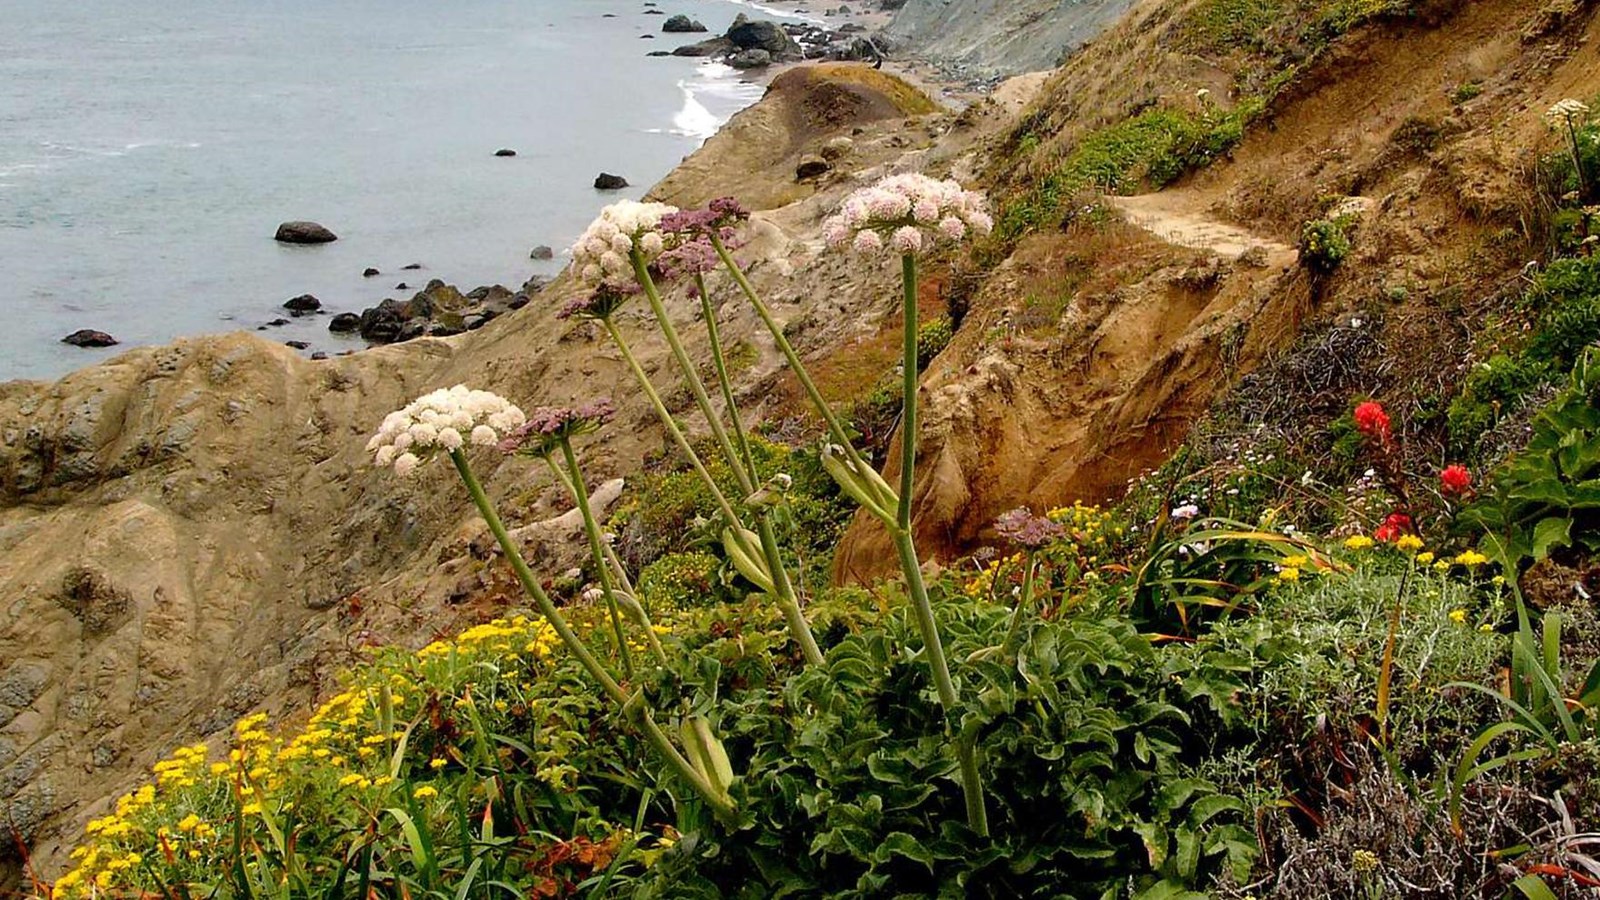  Wildflowers on the rocky coastal bluffs with Golden Gate Bridge partially in fog in background. 